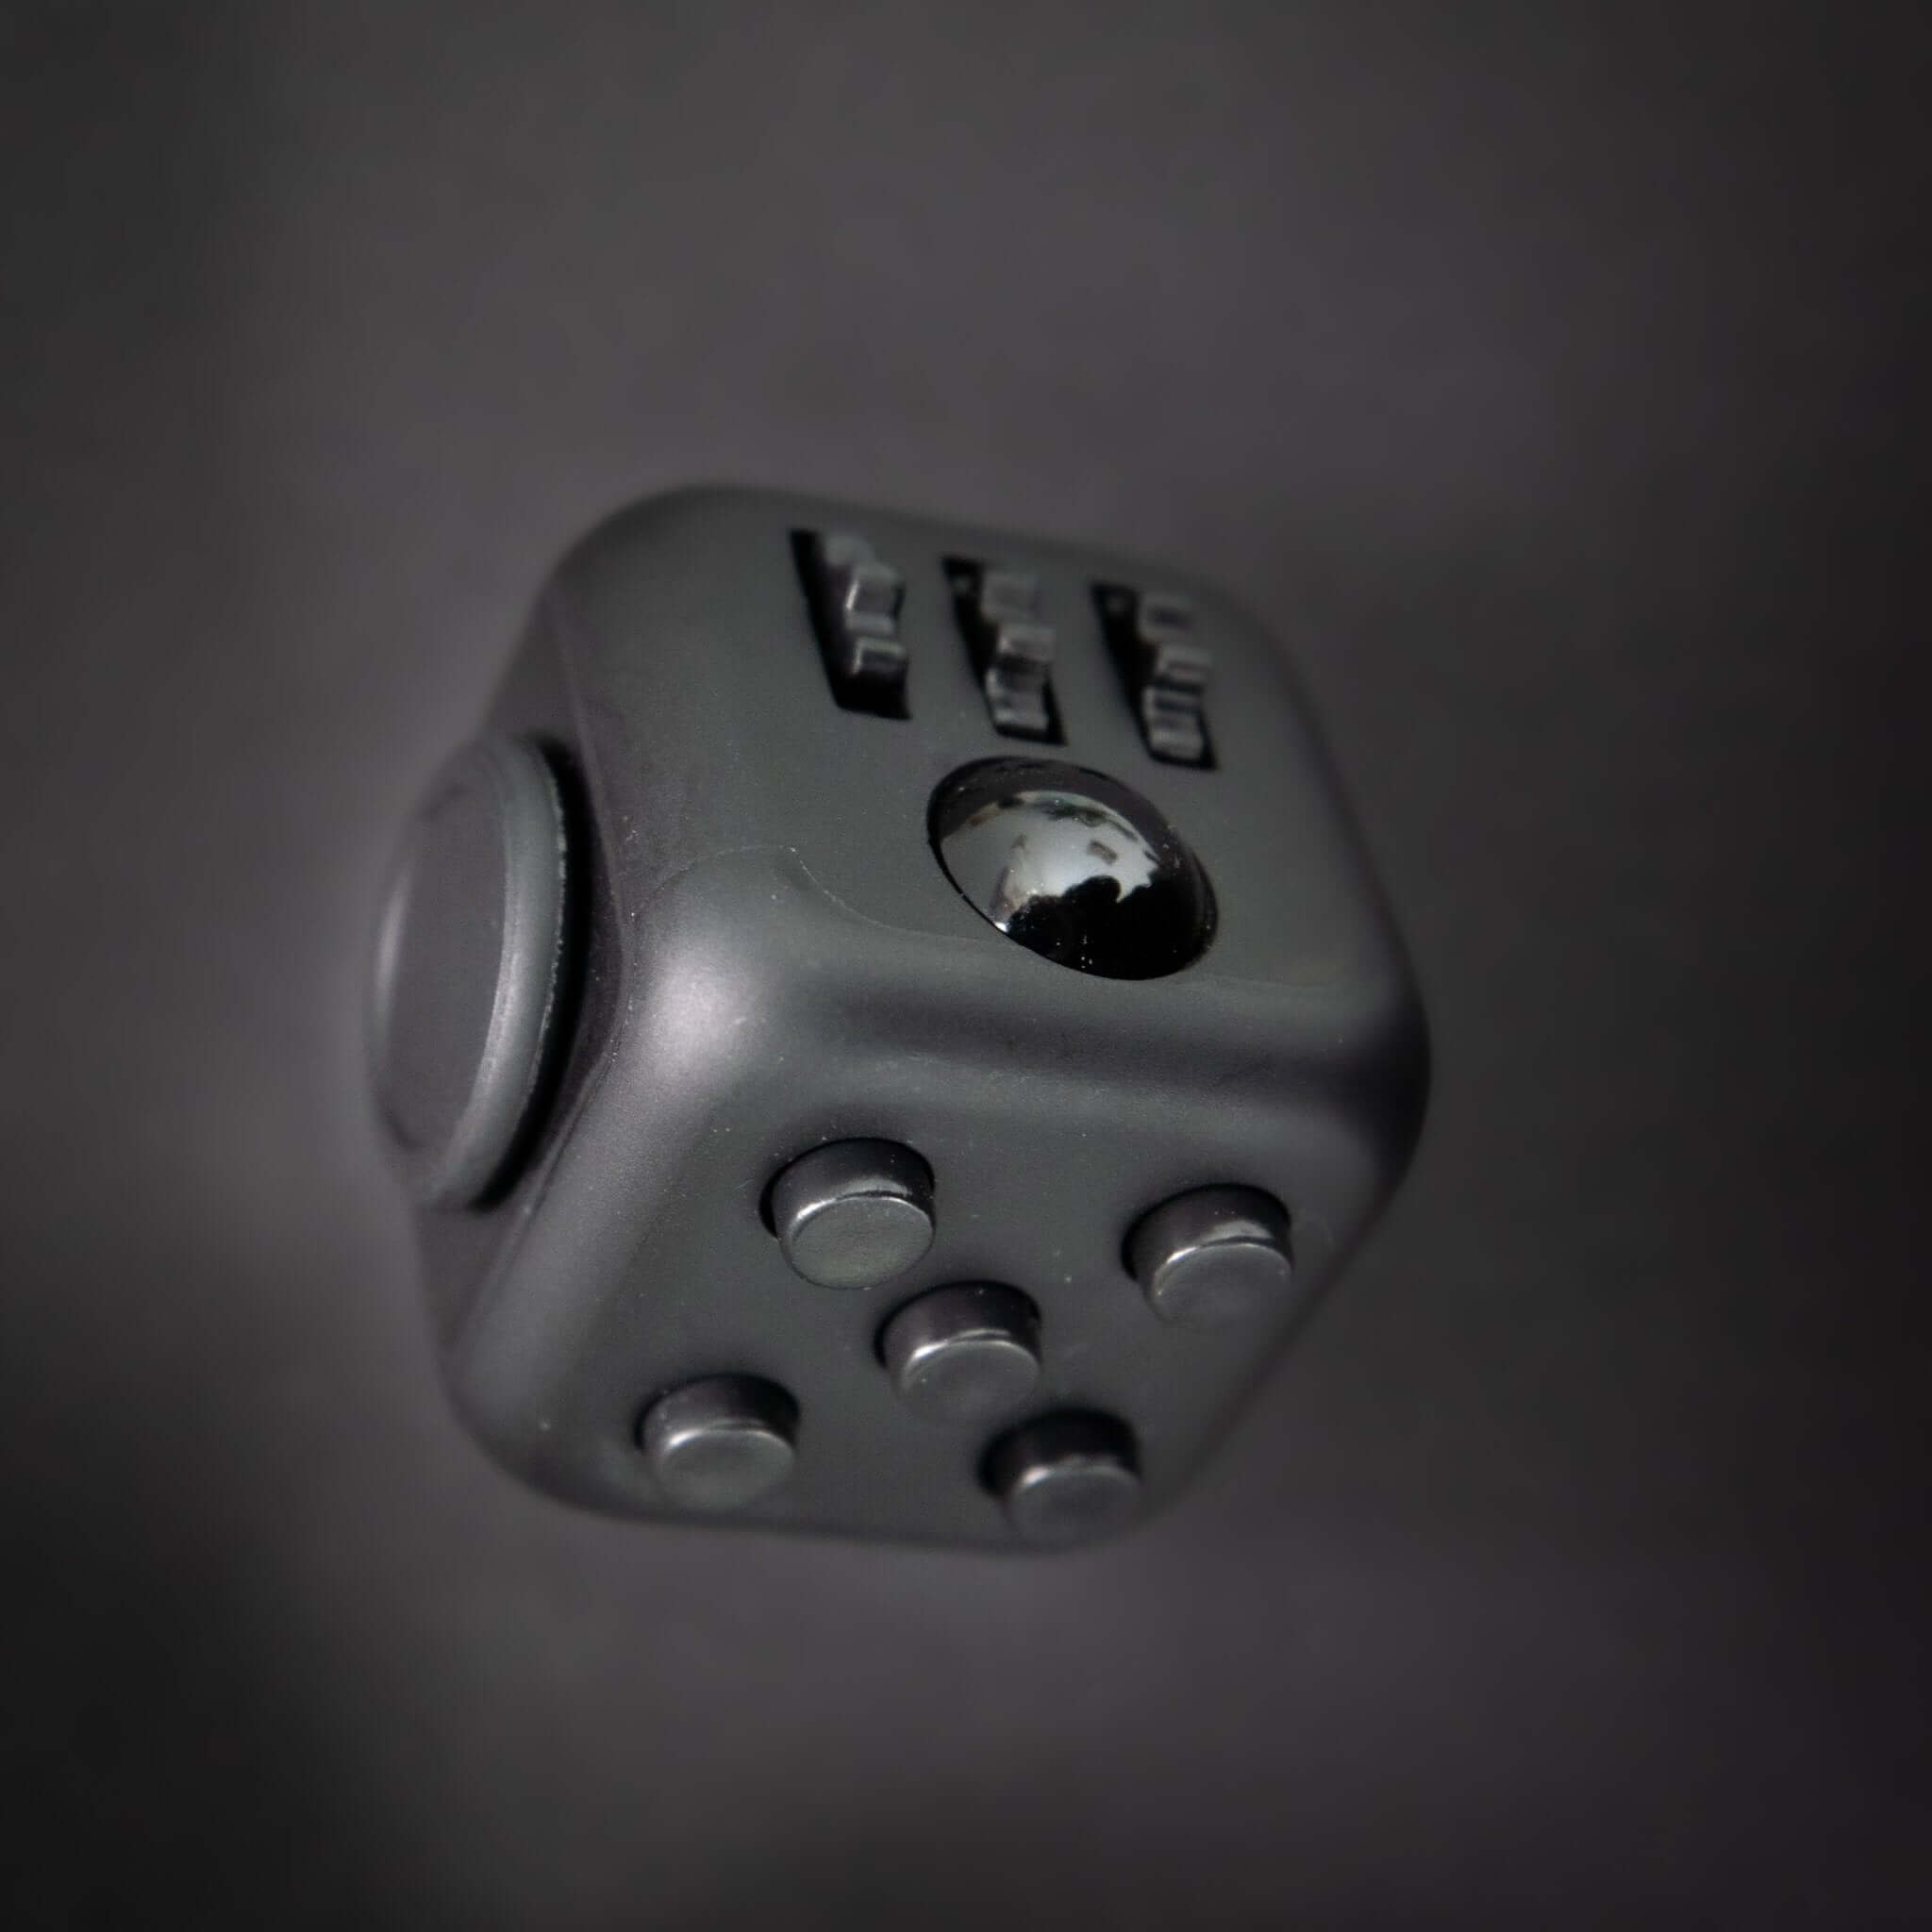 Get Fidget Spinner at the Home of the Original Fidget Cube